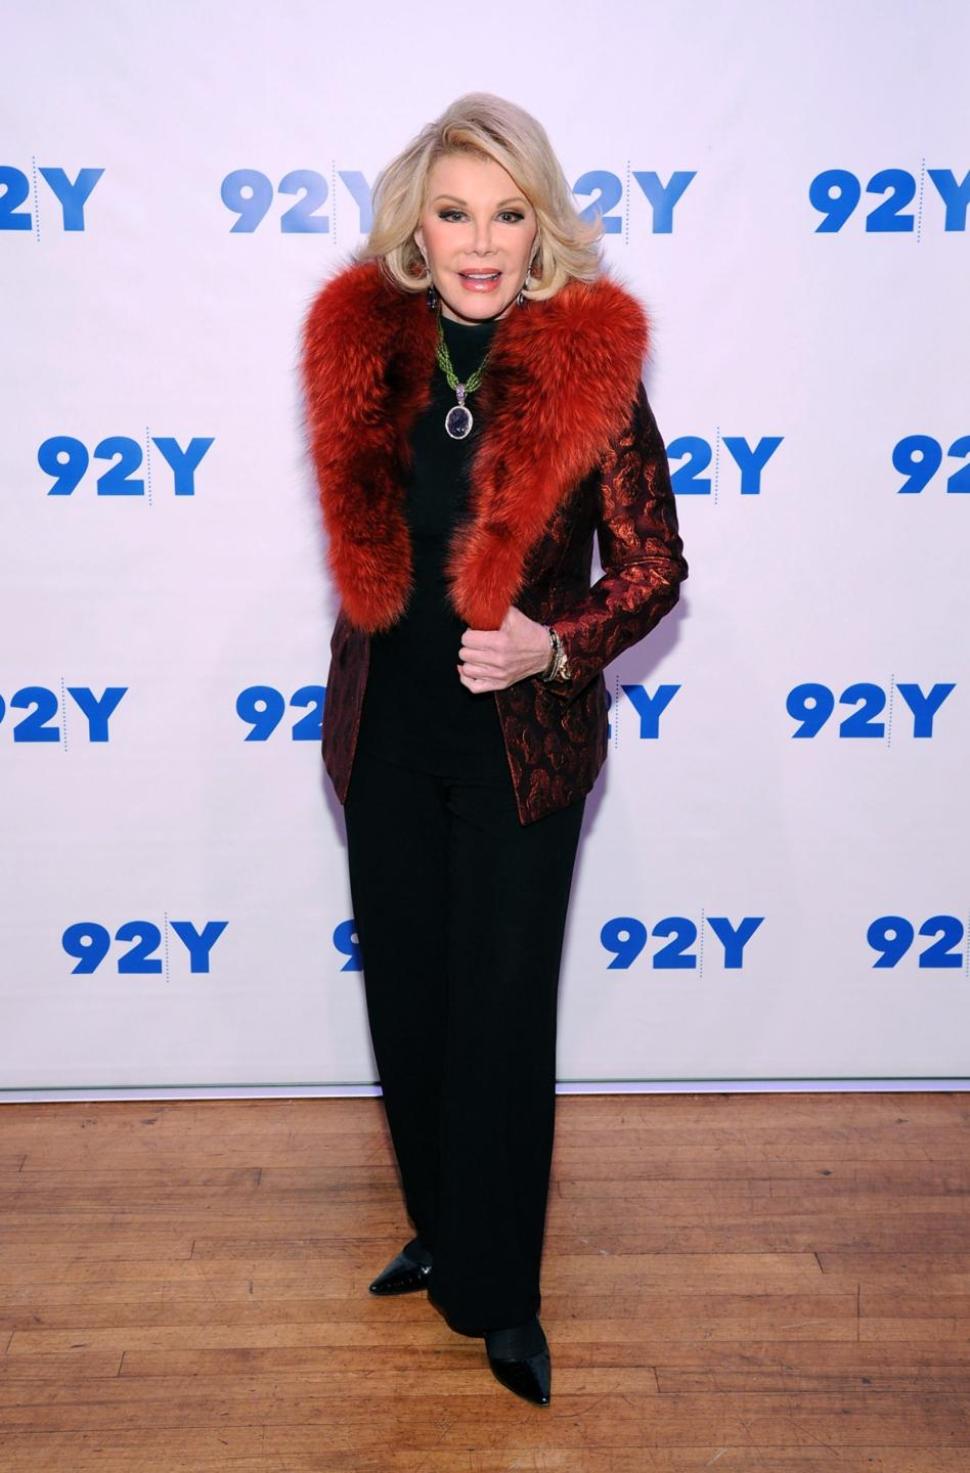 The FDNY has launched a probe of nearly a dozen EMS workers after discovering they accessed the 911 emergency records tied to Joan Rivers’ death, the Daily News has learned.